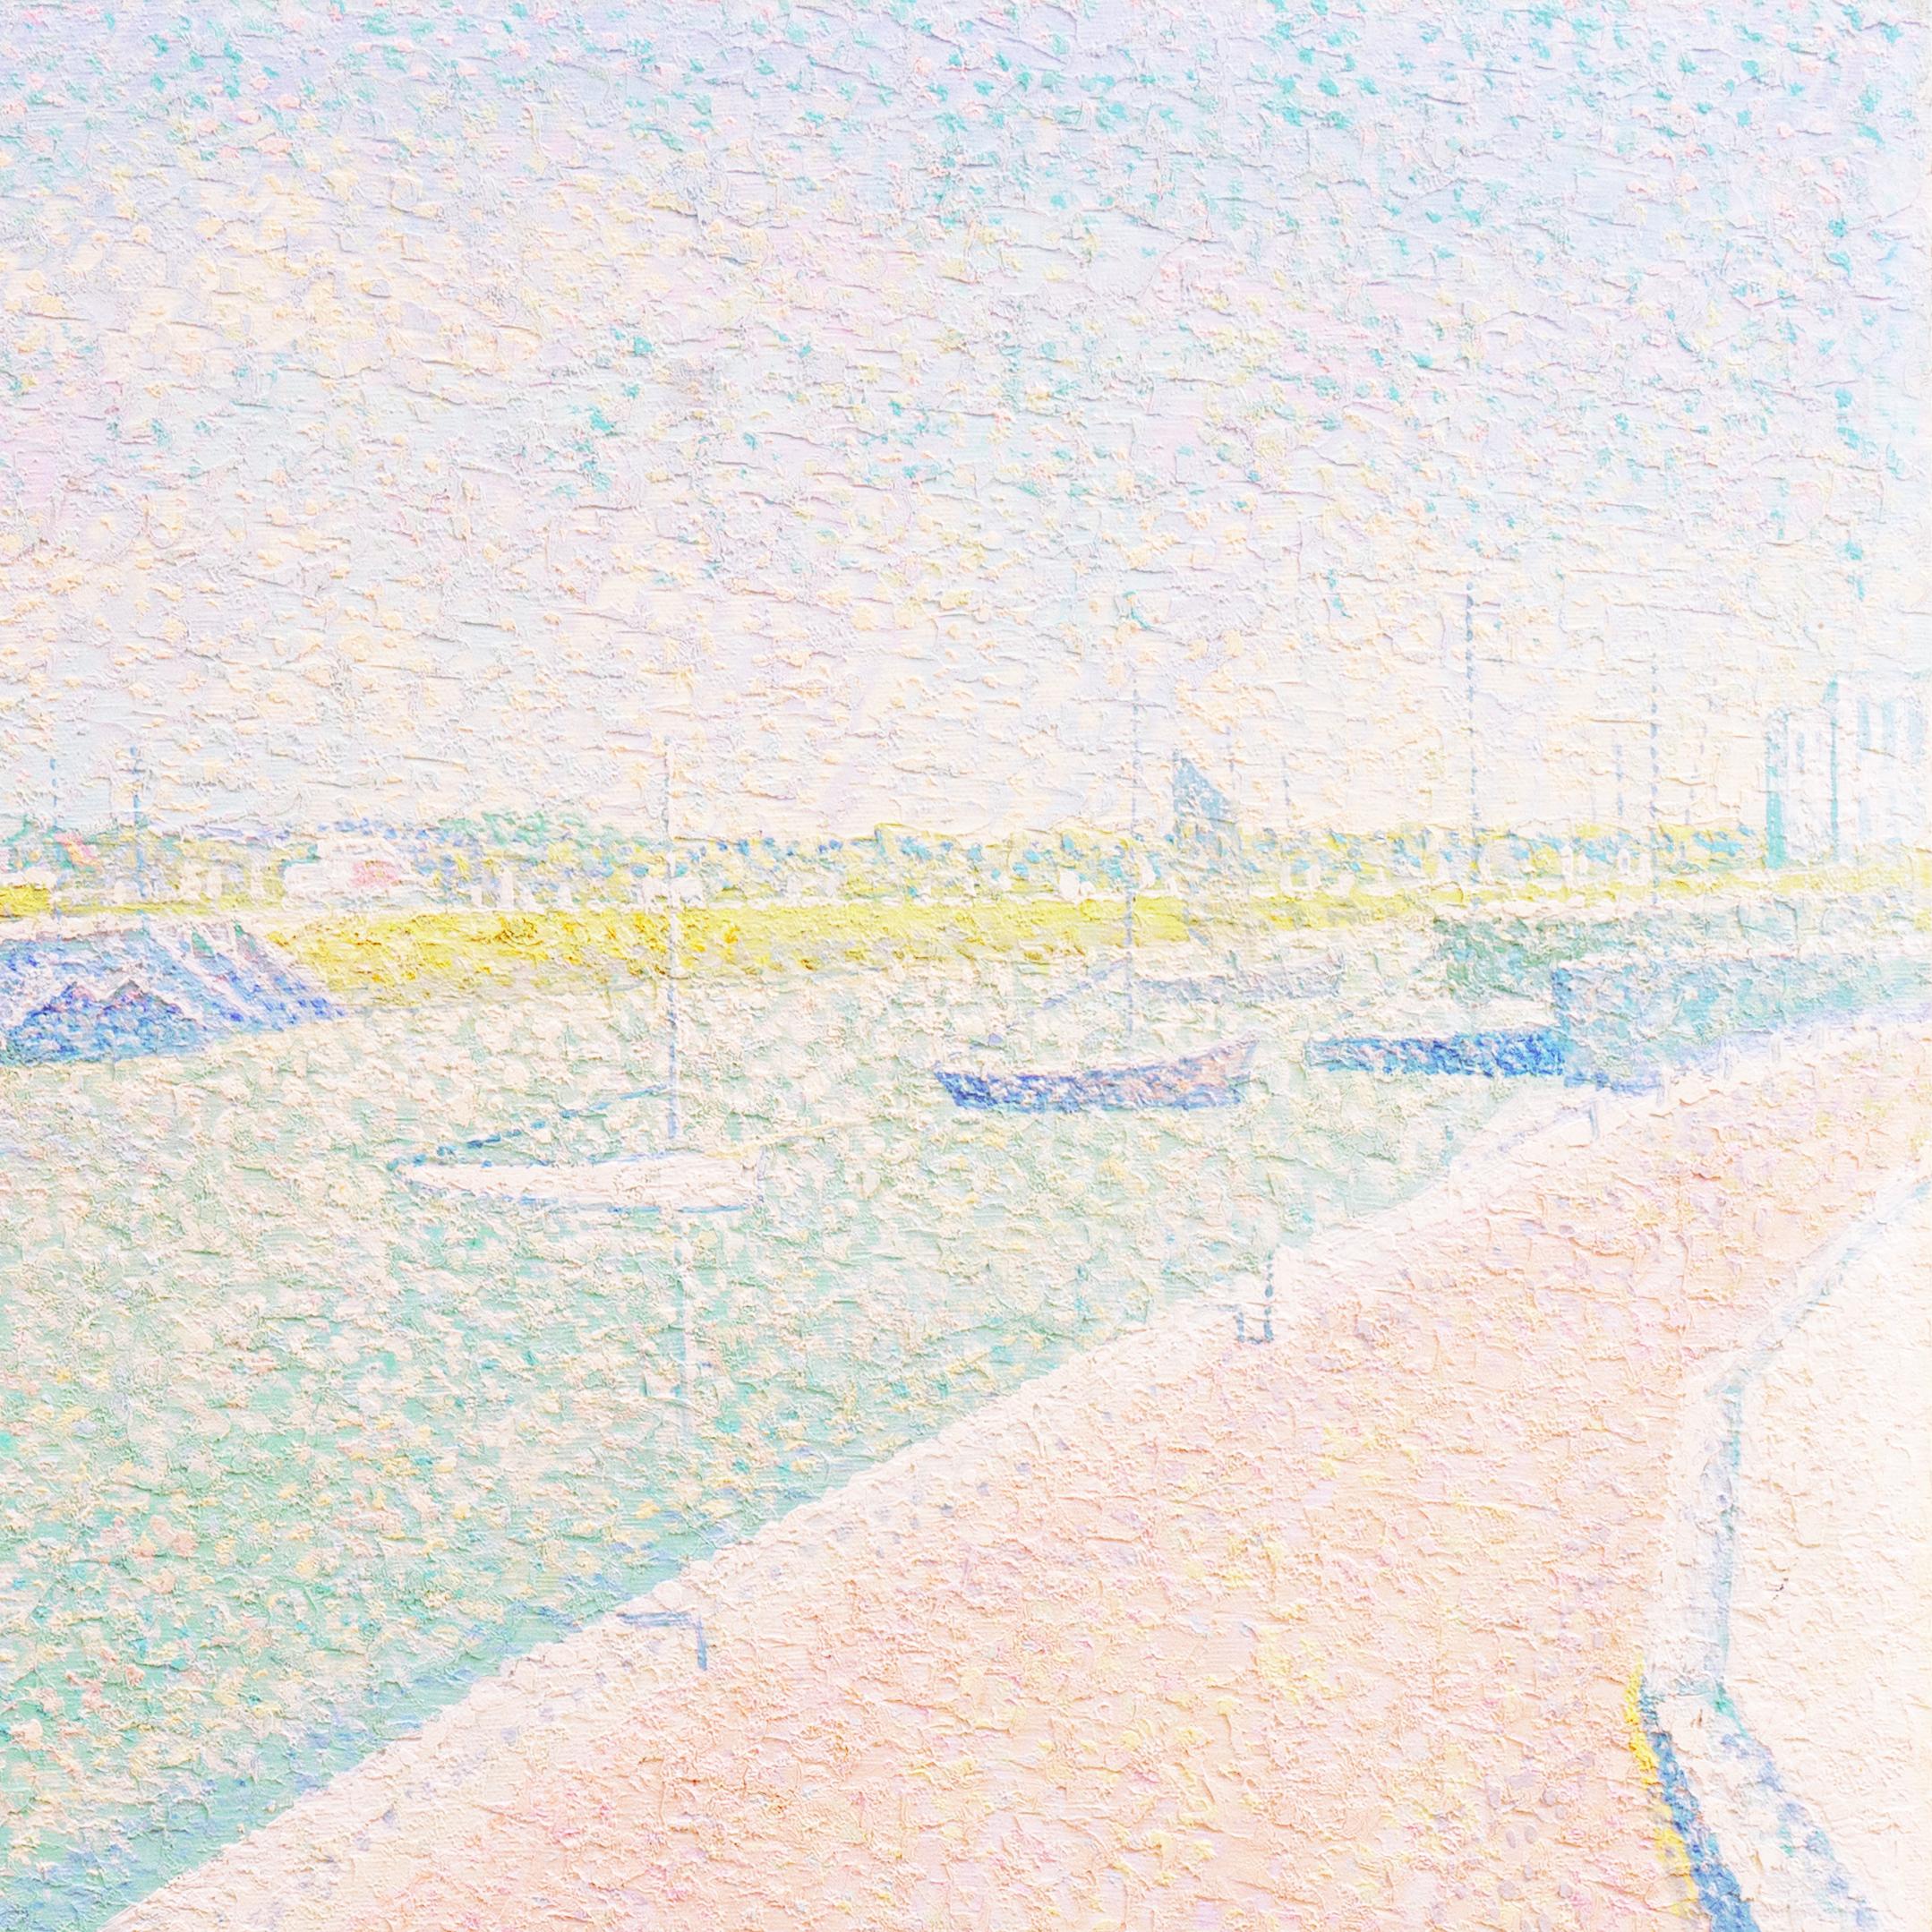 Signed lower right, 'Paul Thomas' (American, born 1955) and painted circa 1975; 
old exhibition label verso bearing title 'Le Quai D'Exposition Modern a Bordeaux'. 

An elegant, mid-century Pointillist oil landscape showing a view of the Charles